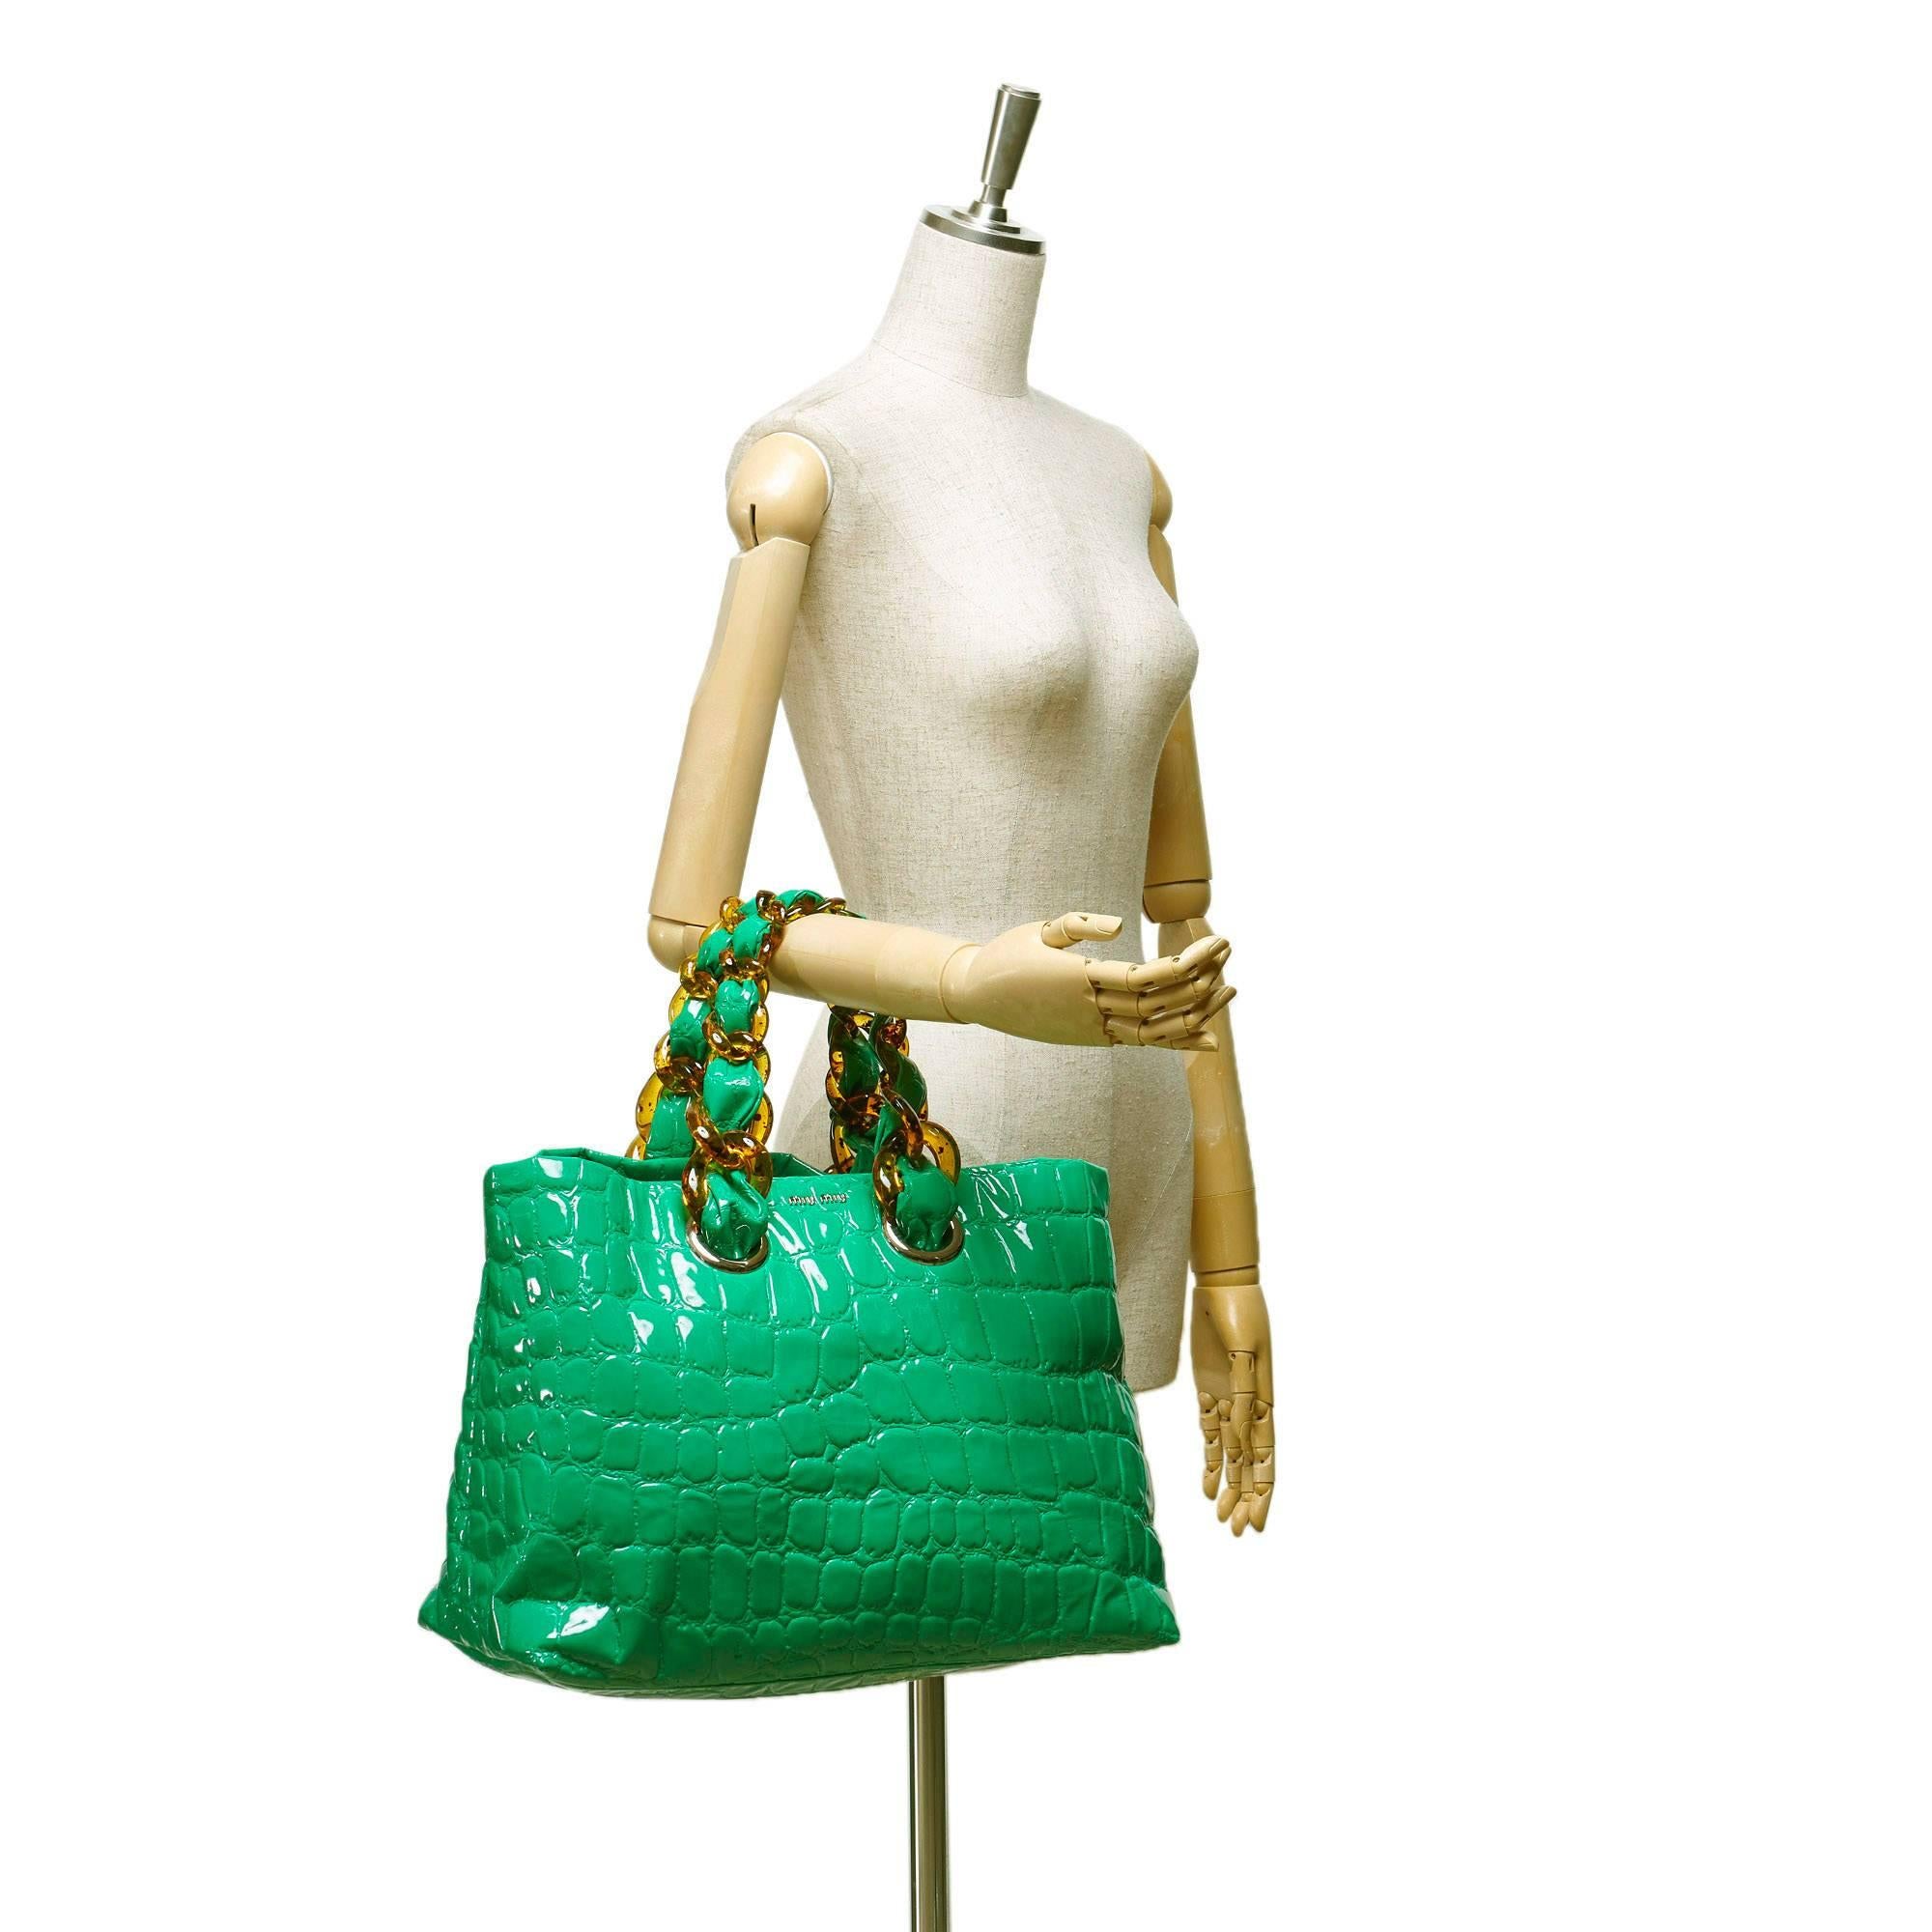 - This Mui Mui tote bag features a green patent croc leather body, leather strap with yellow plastic chains, open top, and interior zip pocket. Love the colour and the texture of this bag!!!

- Made in Italy. 

- Size: 41cm x 30cm x 19cm. Shoulder